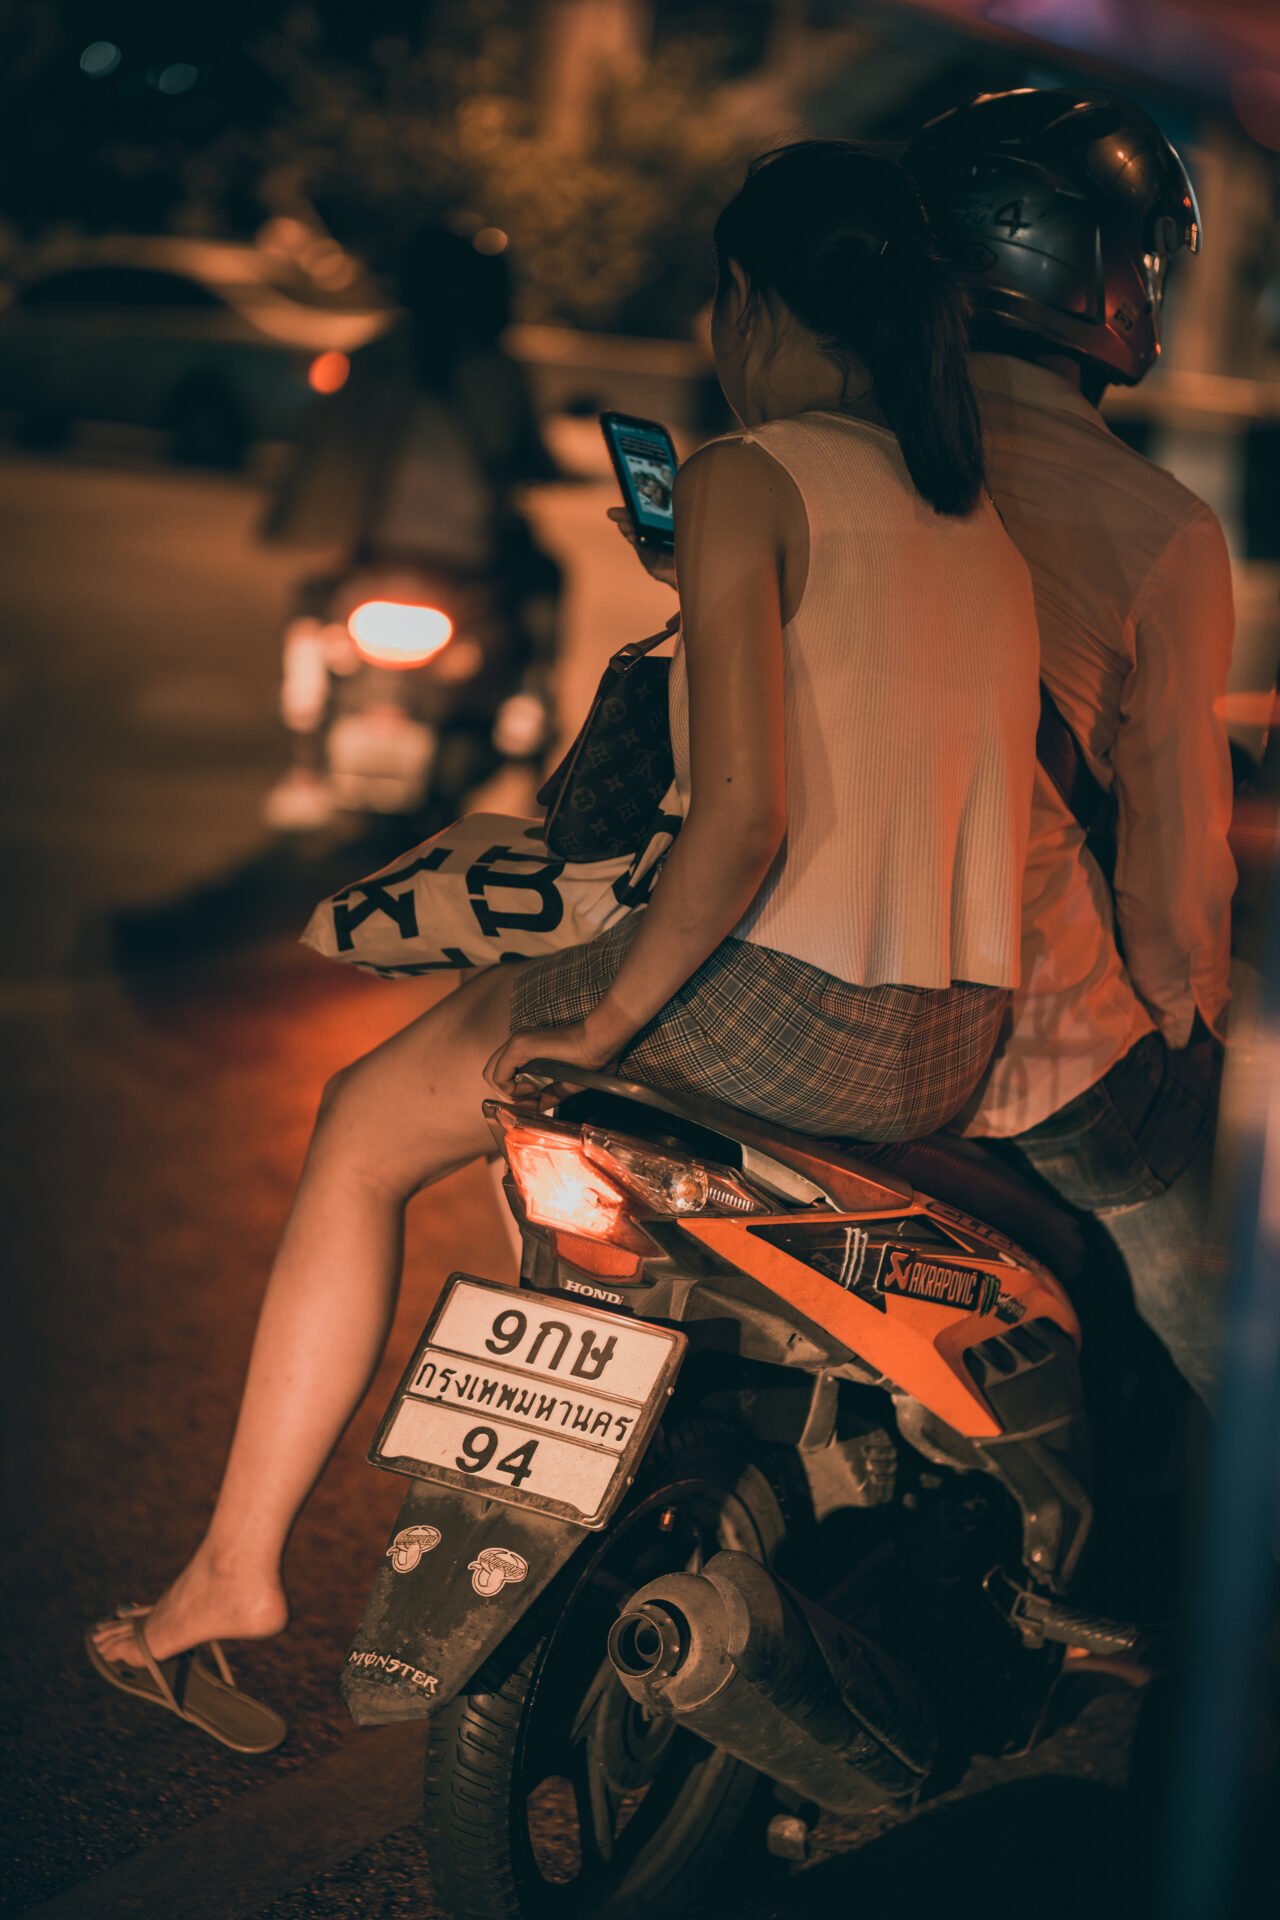 In the glow of the streetlights, a passenger on a motorbike checks her phone, highlighting the interplay of connectivity and mobility in the urban night.